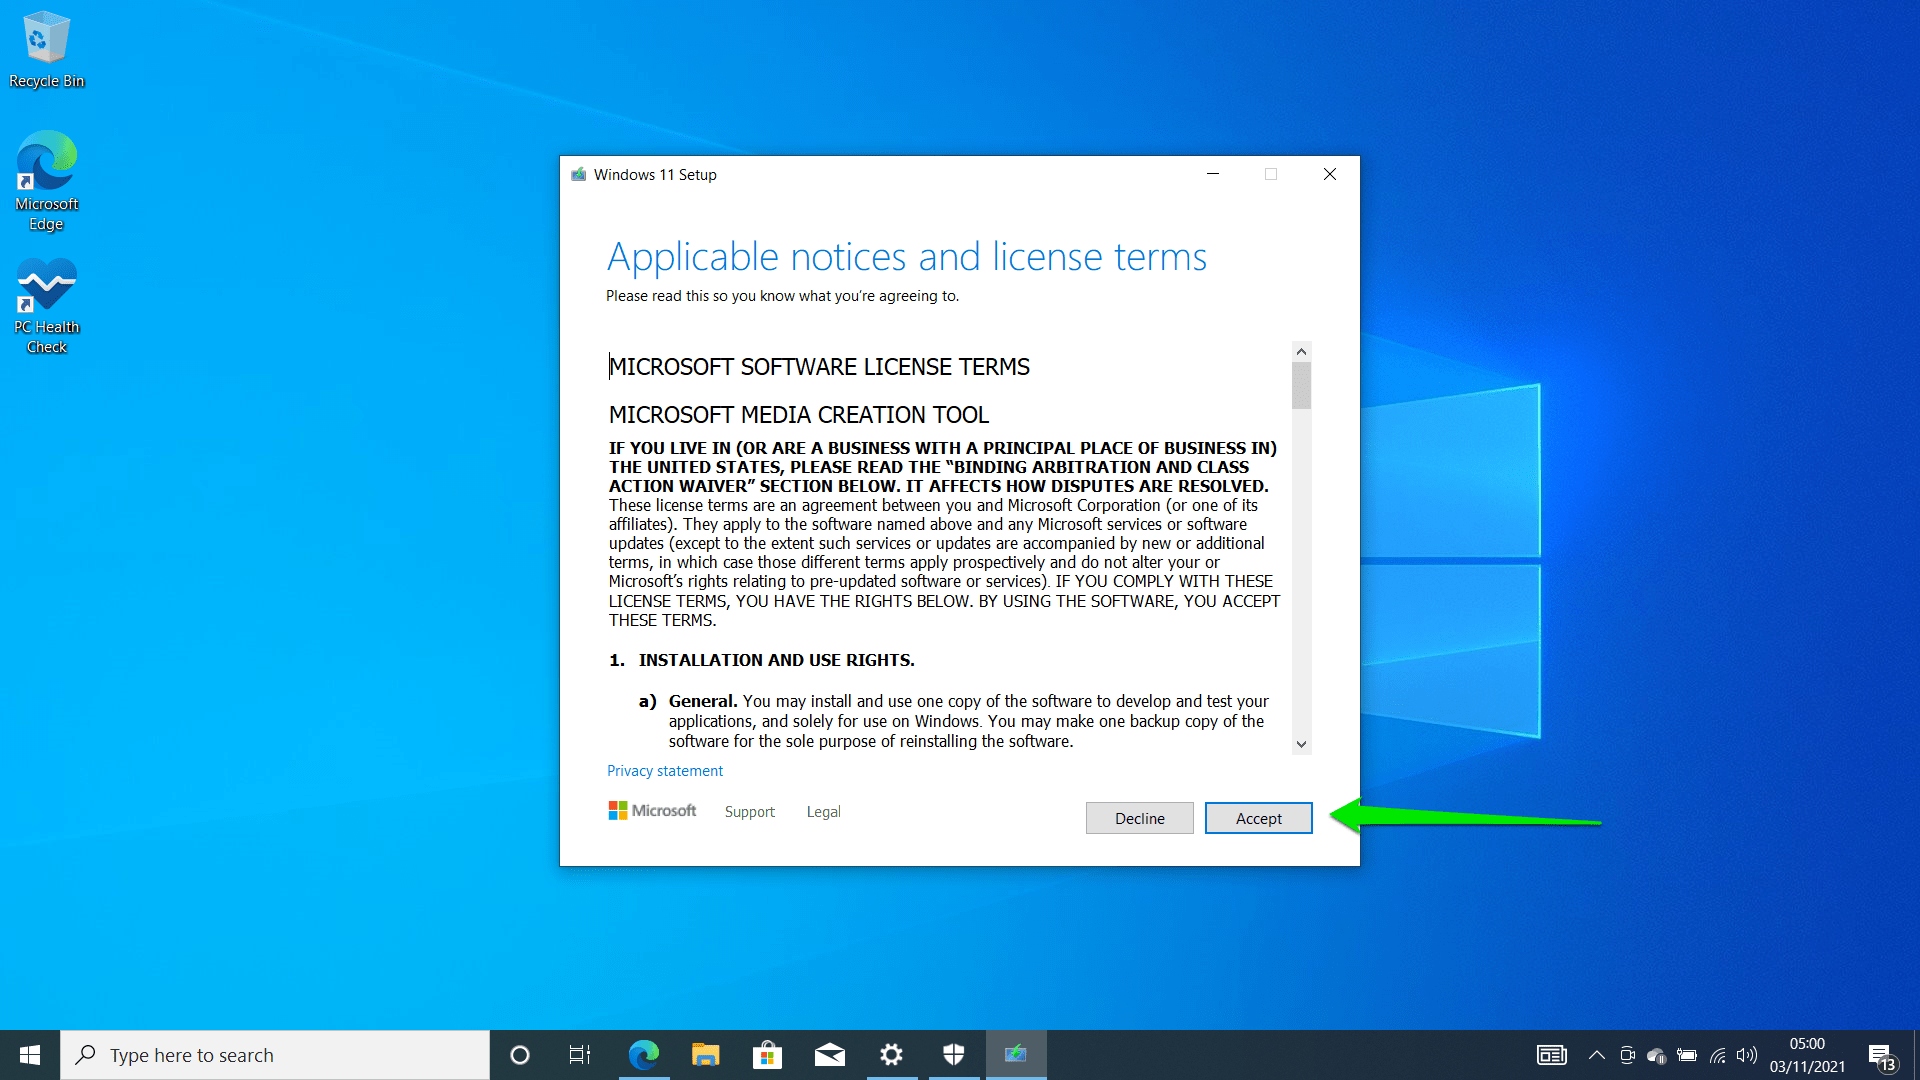 Accept the license once the Windows 11 Setup window